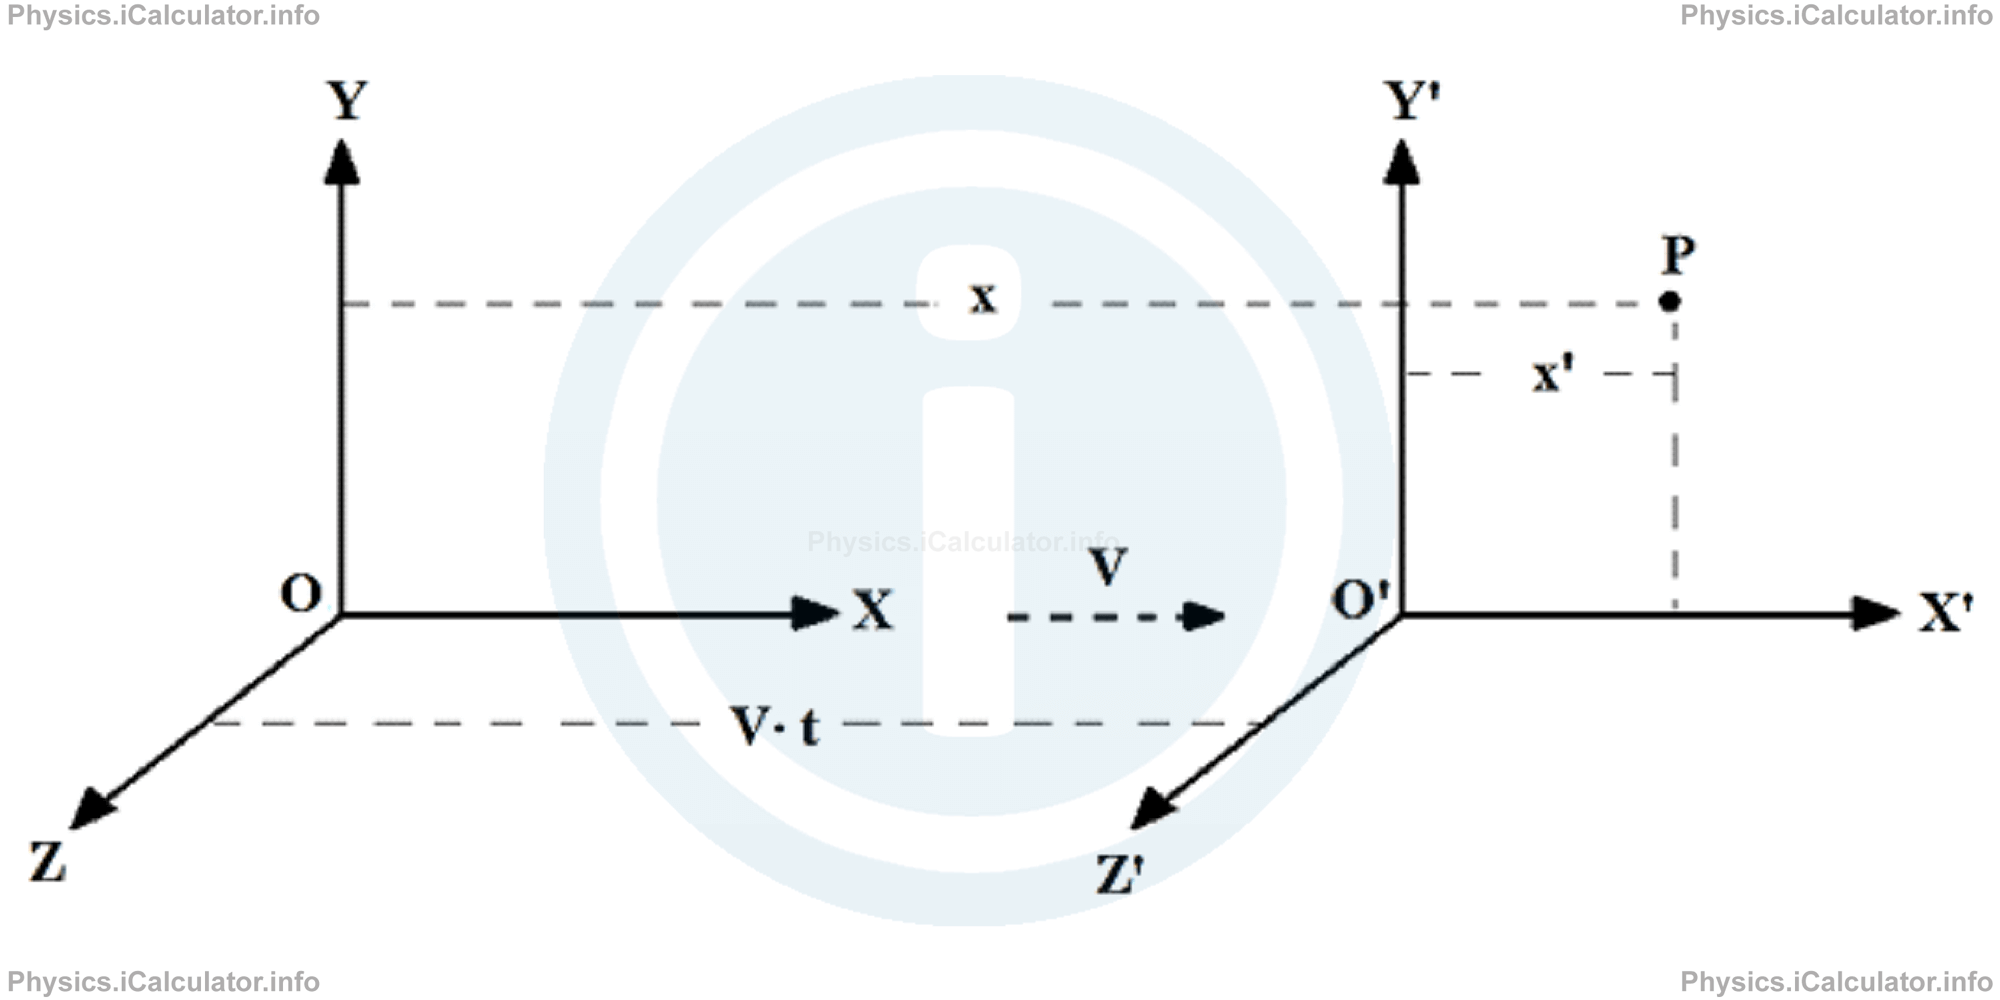 Physics Tutorials: This image provides visual information for the physics tutorial Lorentz Transformations 